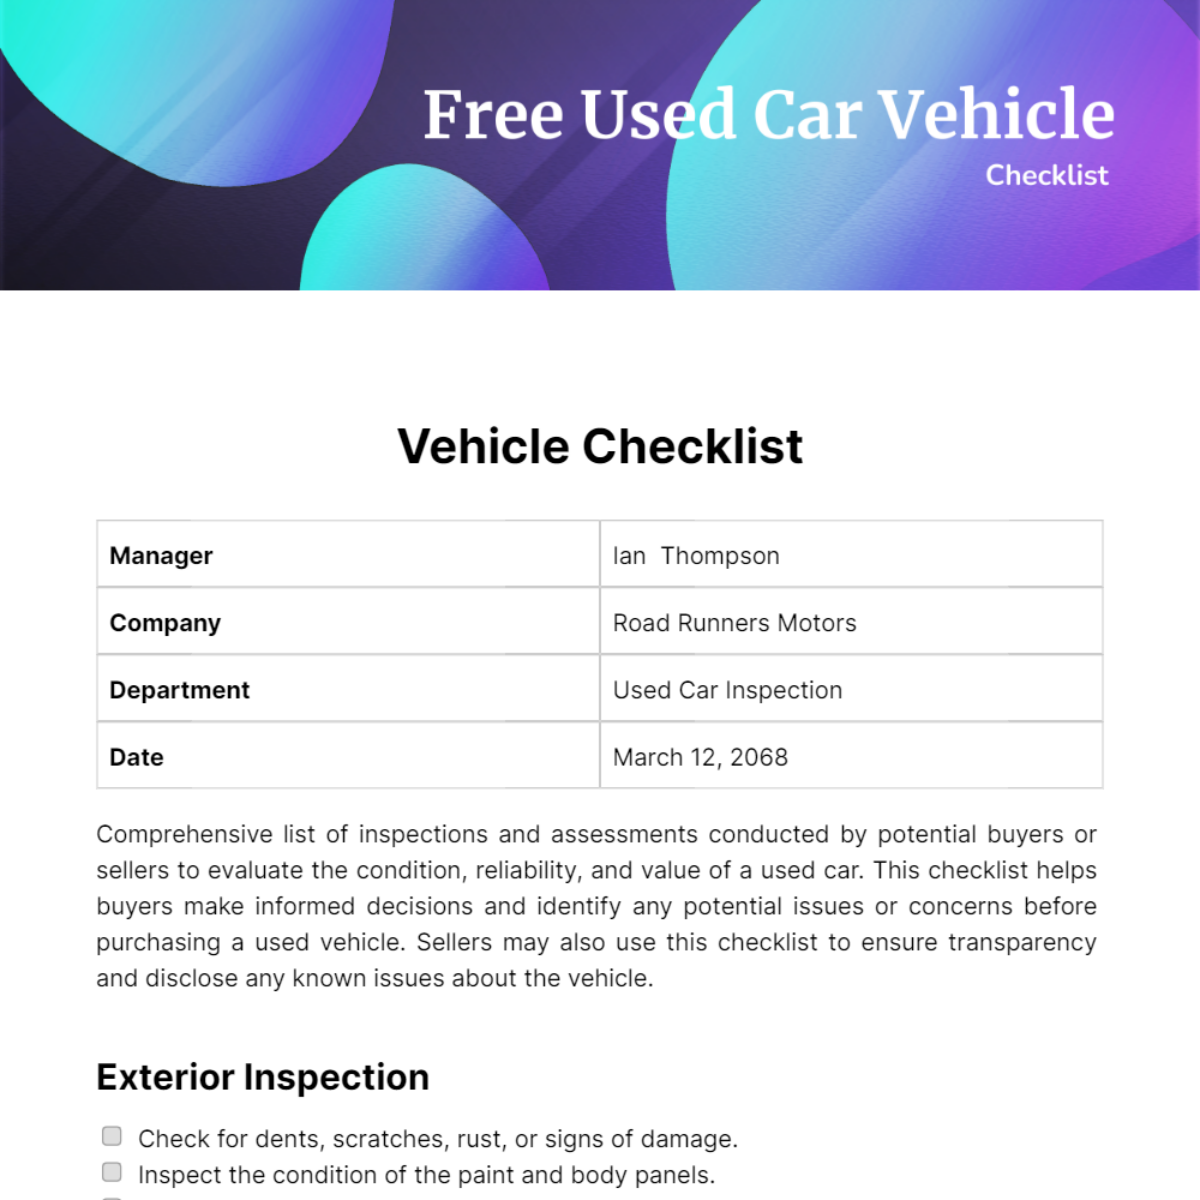 Free Used Car Vehicle Checklist Template